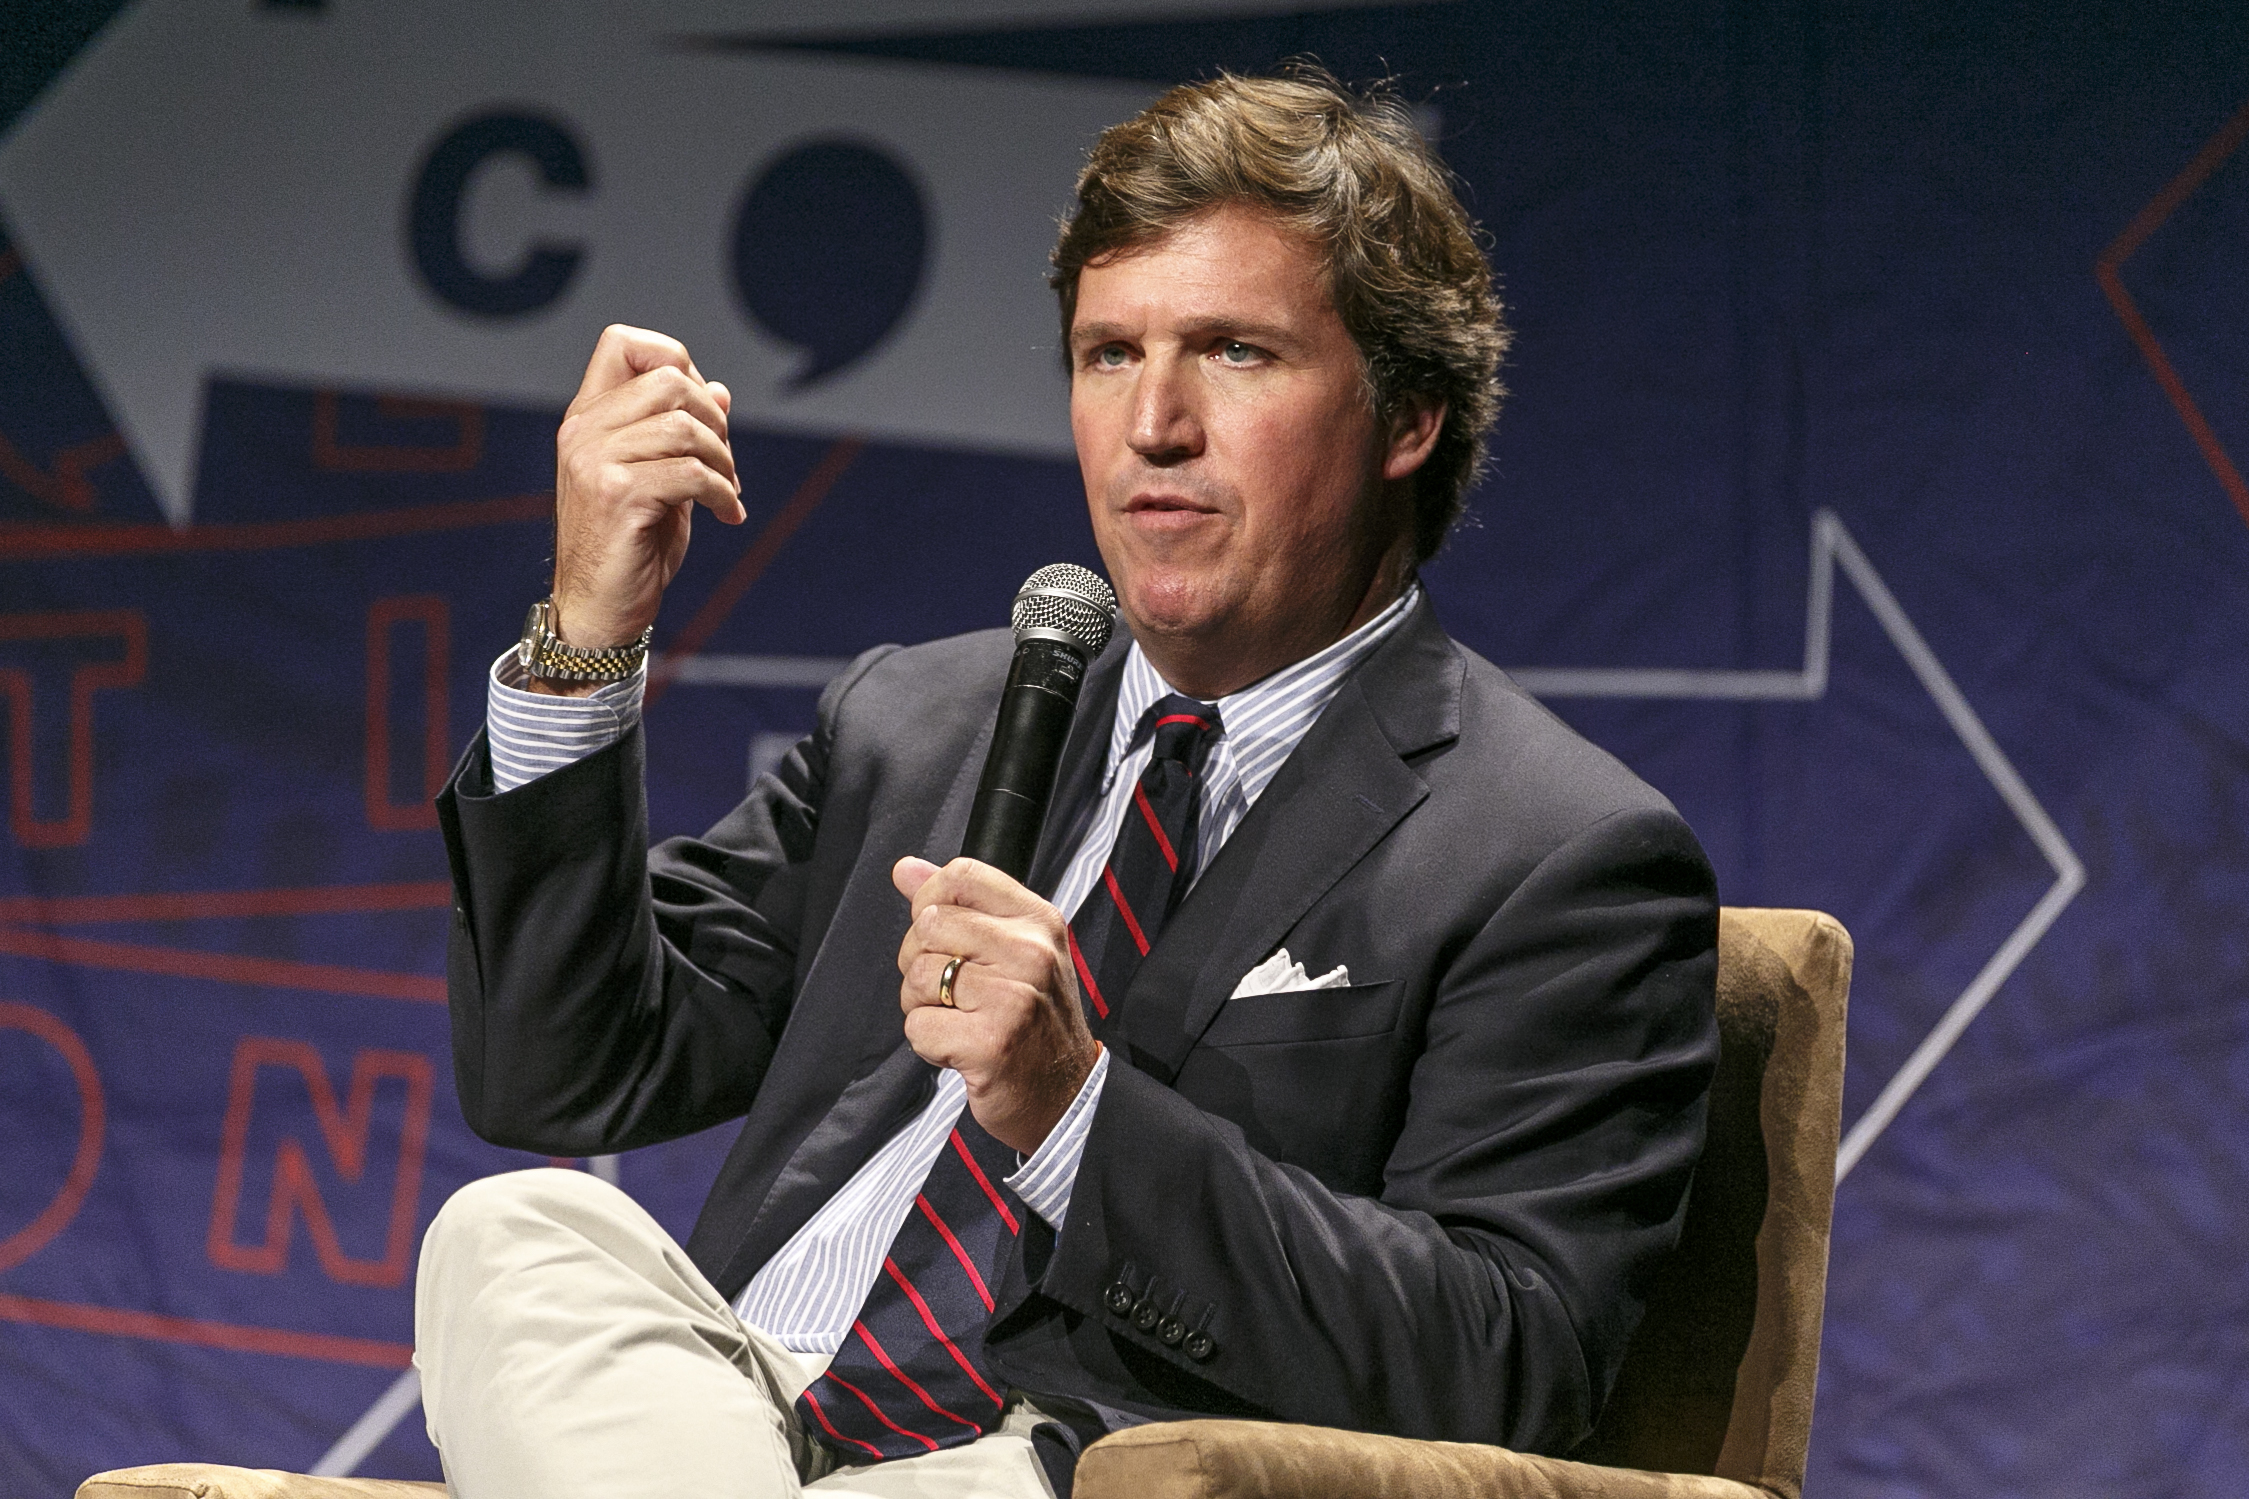 Tucker Carlson speaks onstage during Politicon 2018 at Los Angeles Convention Center on Oct. 21, 2018. (Rich Polk&mdash;Politicon/Getty Images)